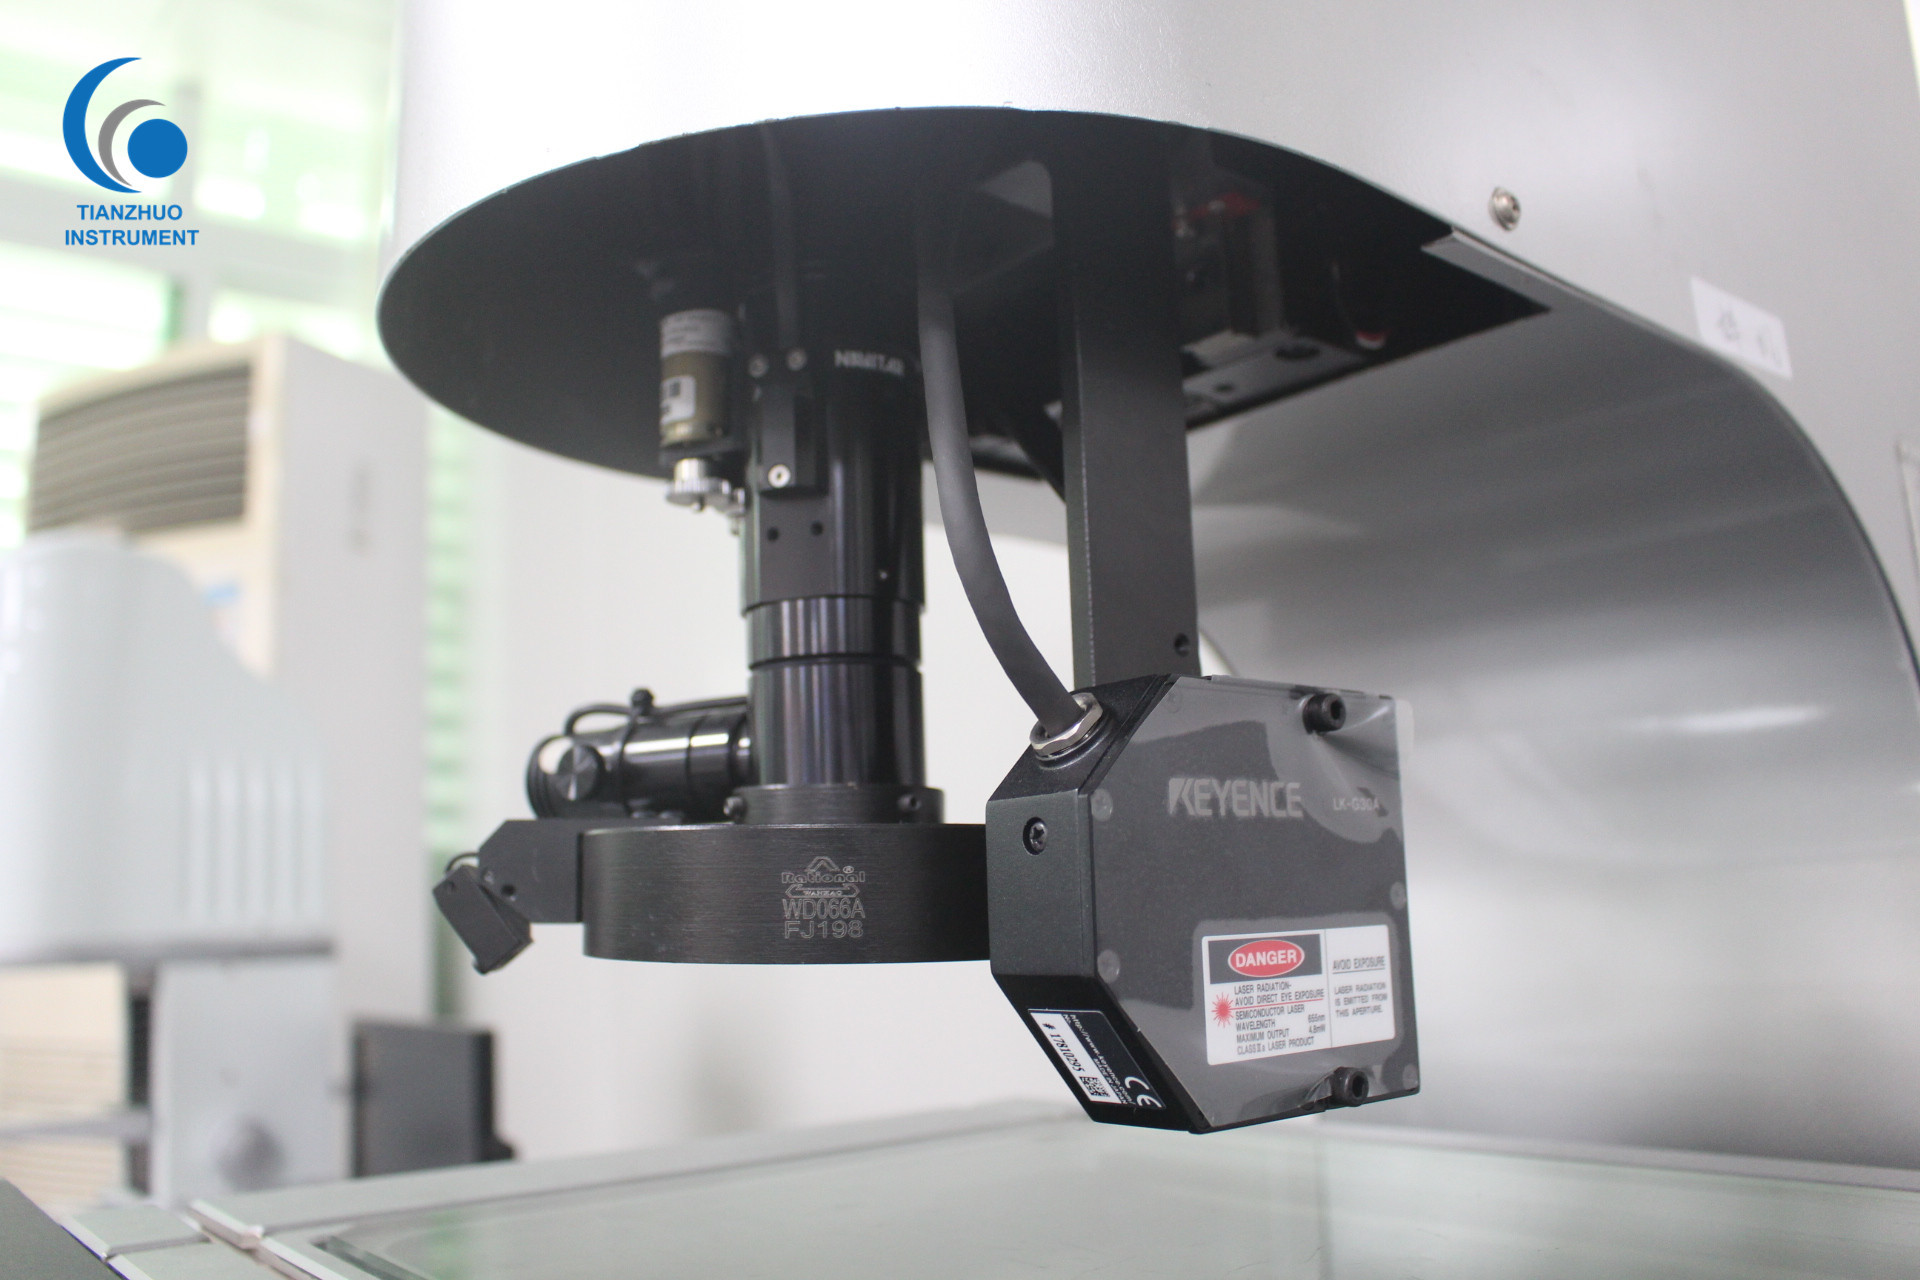 Programmable CNC Video Measuring System Easy To Operate For Sophisticated Workpieces